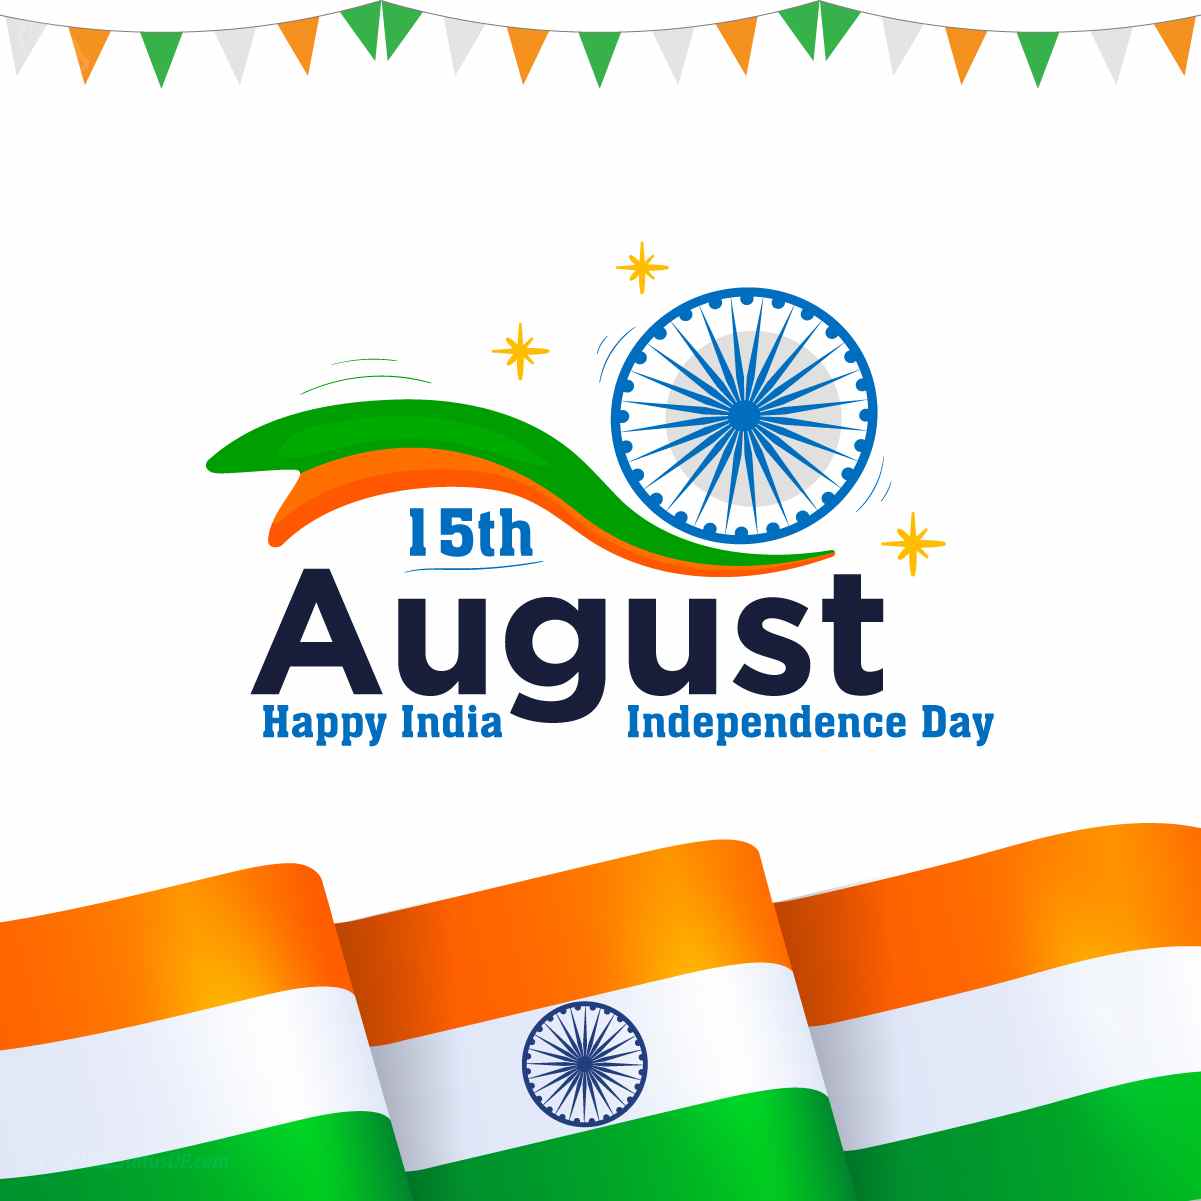 Happy 75th Independence Day 2021 Wishes, Image, Quotes, Messages